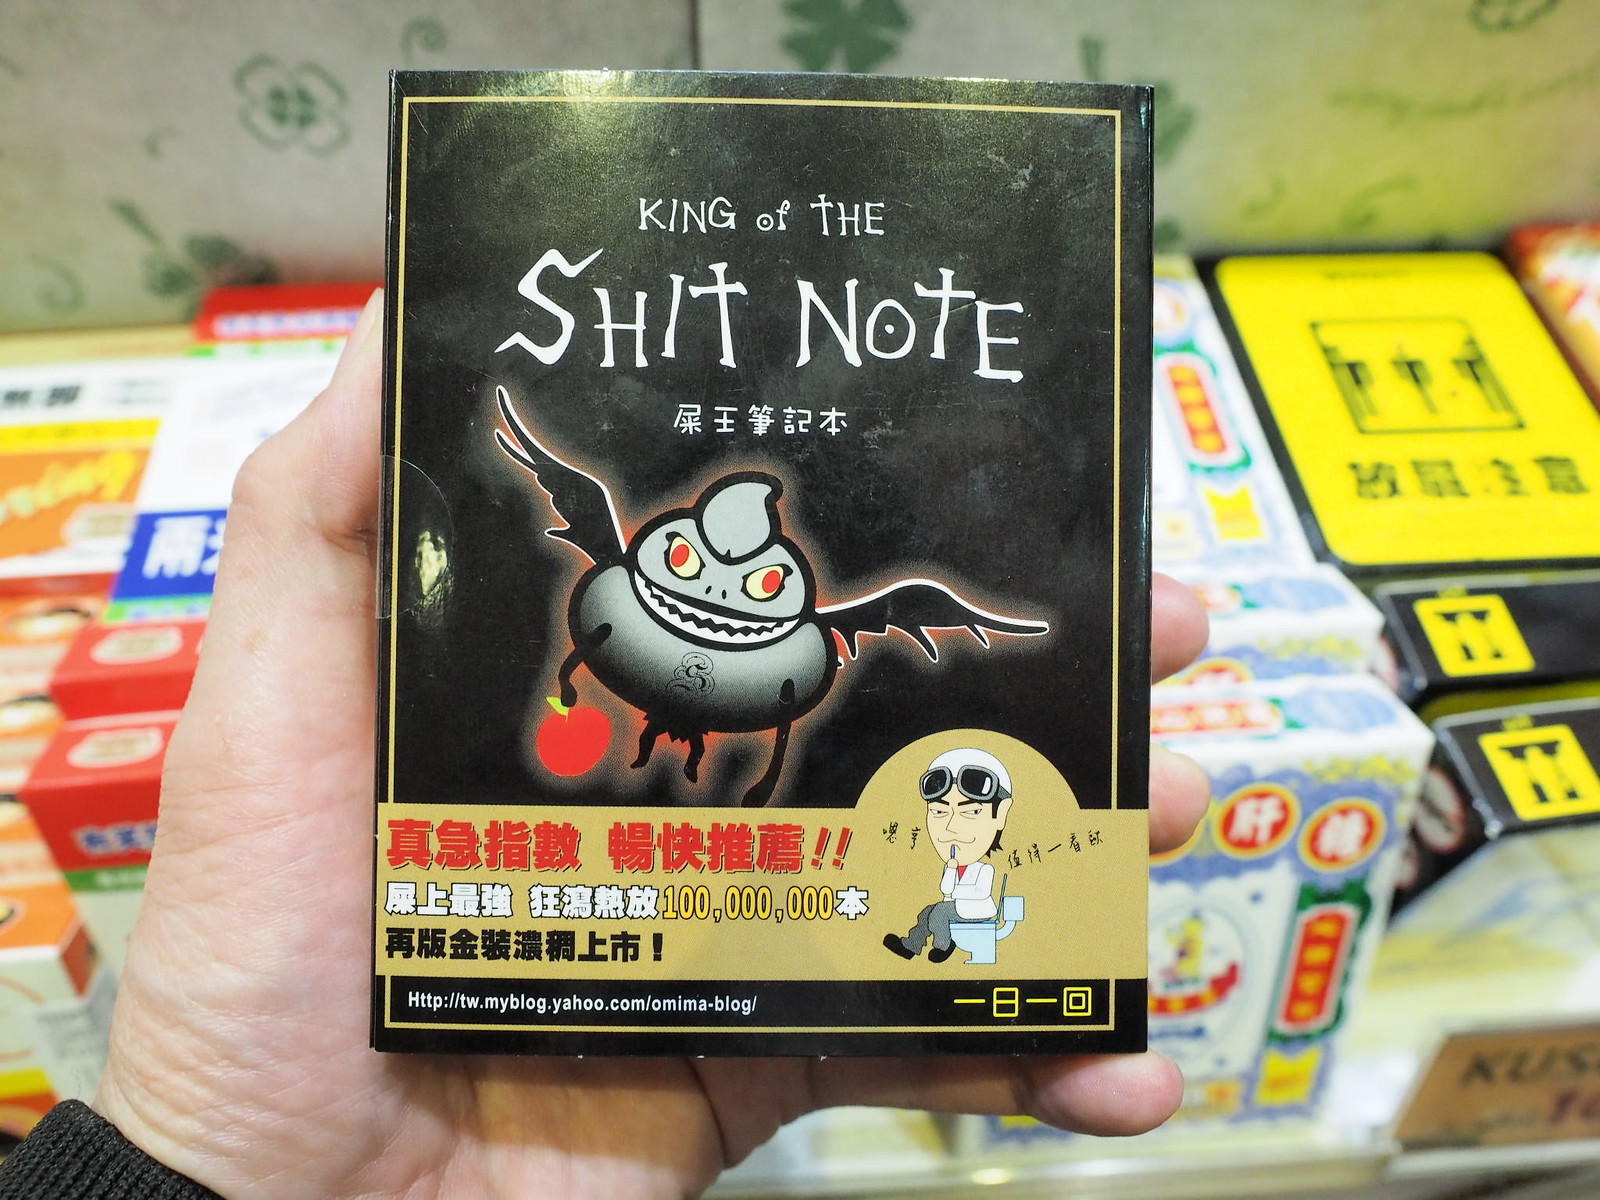 Some game in a box called King of the Shit Note.